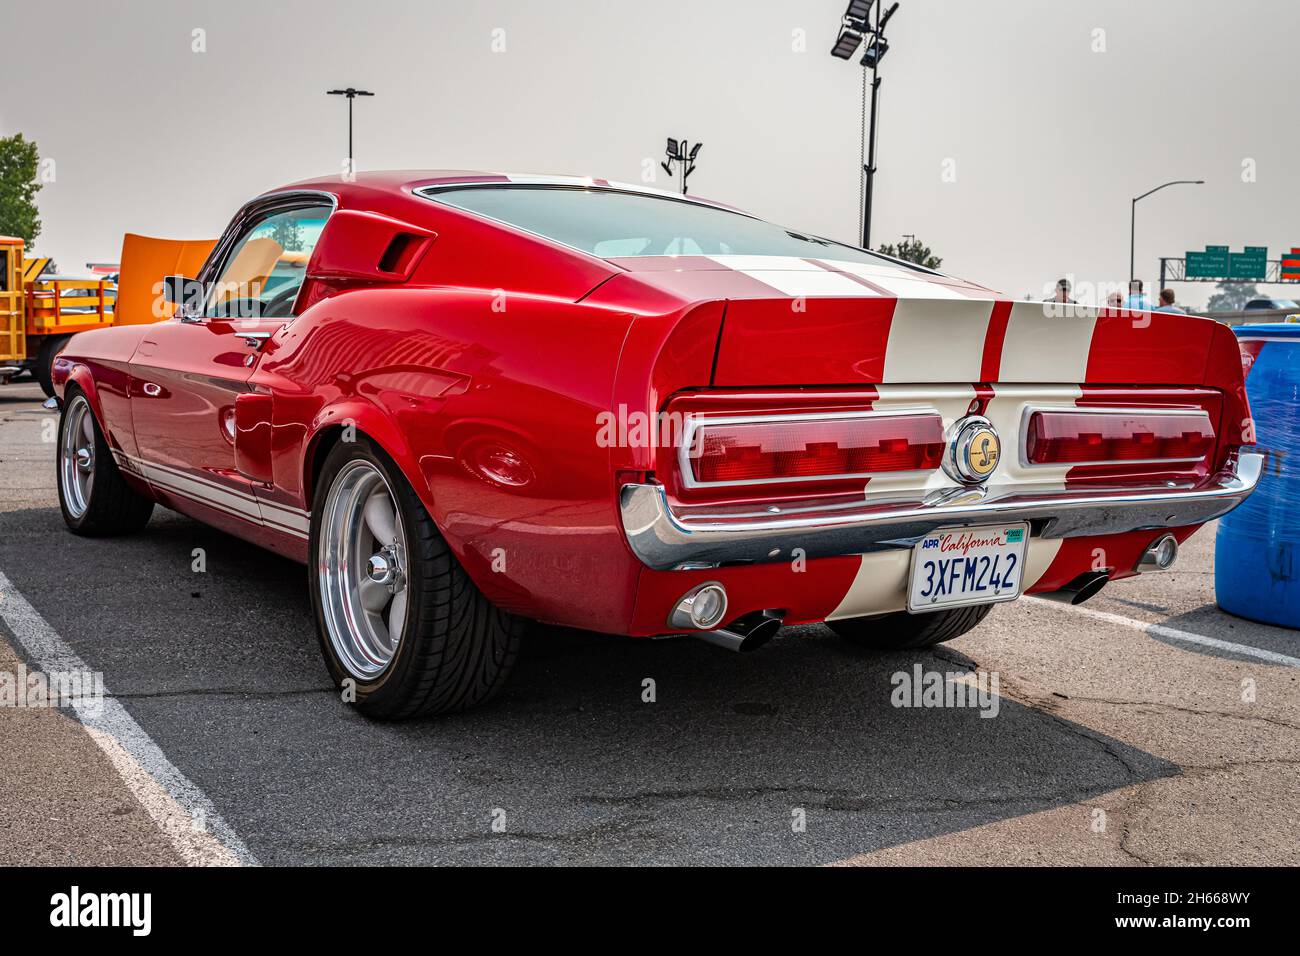 Reno, NV - August 6, 2021: 1967 Shelby Cobra GT500 fastback coupe at a ...